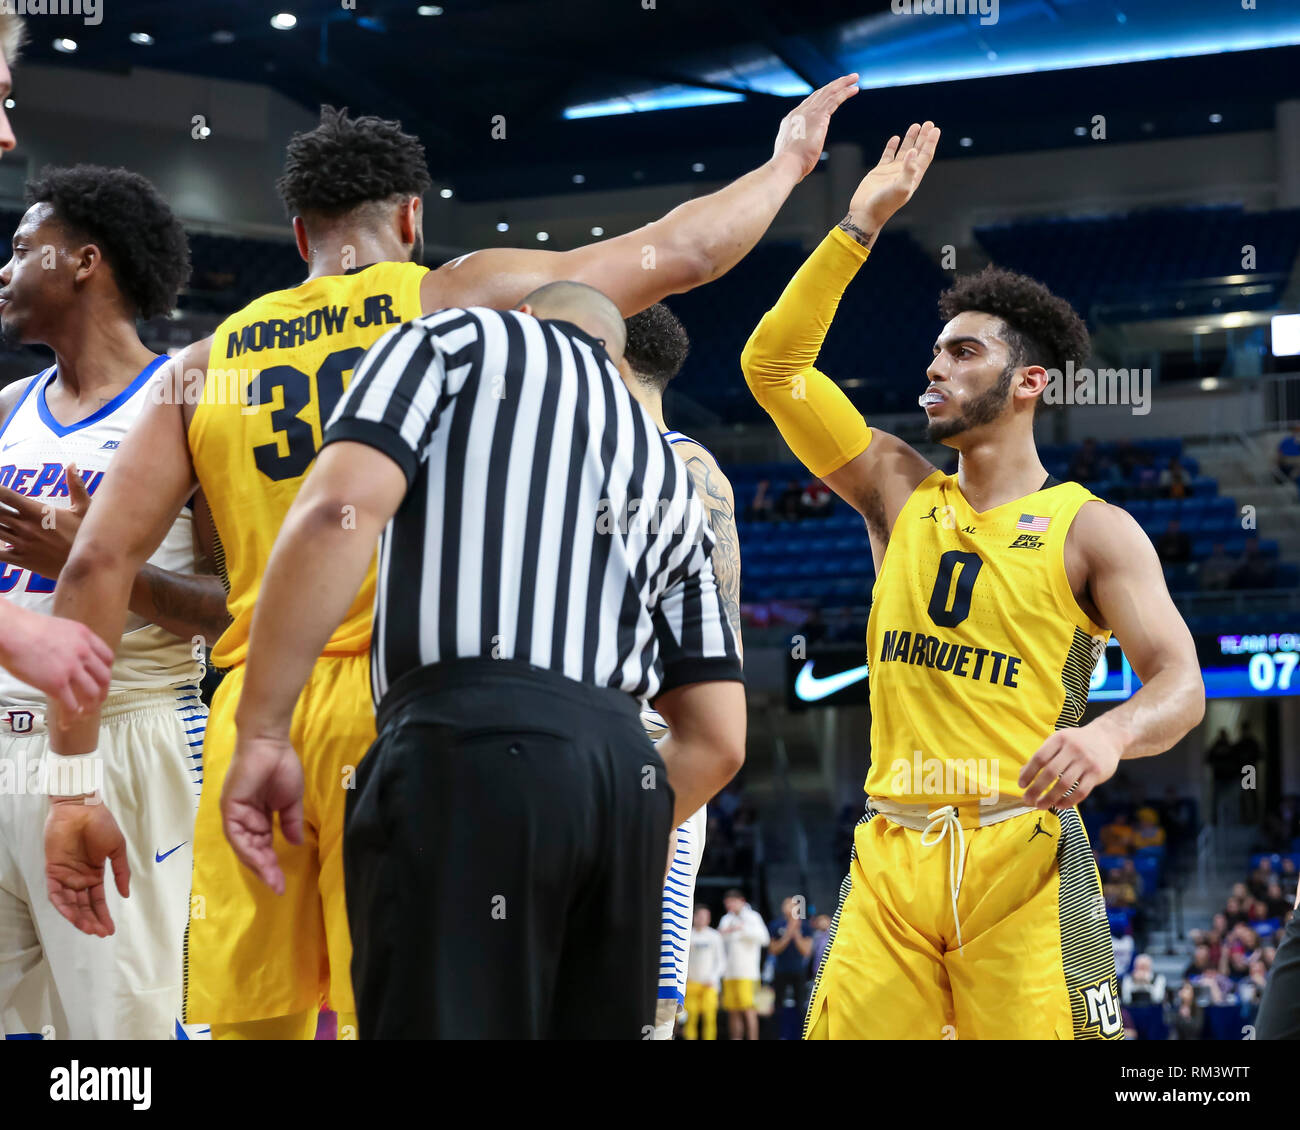 Chicago, USA. 12th Feb 2019. Marquette Golden Eagles guard Markus Howard (0) celebrates with Marquette Golden Eagles forward Ed Morrow (30) after he is fouled during NCAA basketball game between the Marquette Golden Eagles and the DePaul University Blue Demons at Wintrust Arena in Chicago IL. Gary E. Duncan Sr/CSM Credit: Cal Sport Media/Alamy Live News Stock Photo